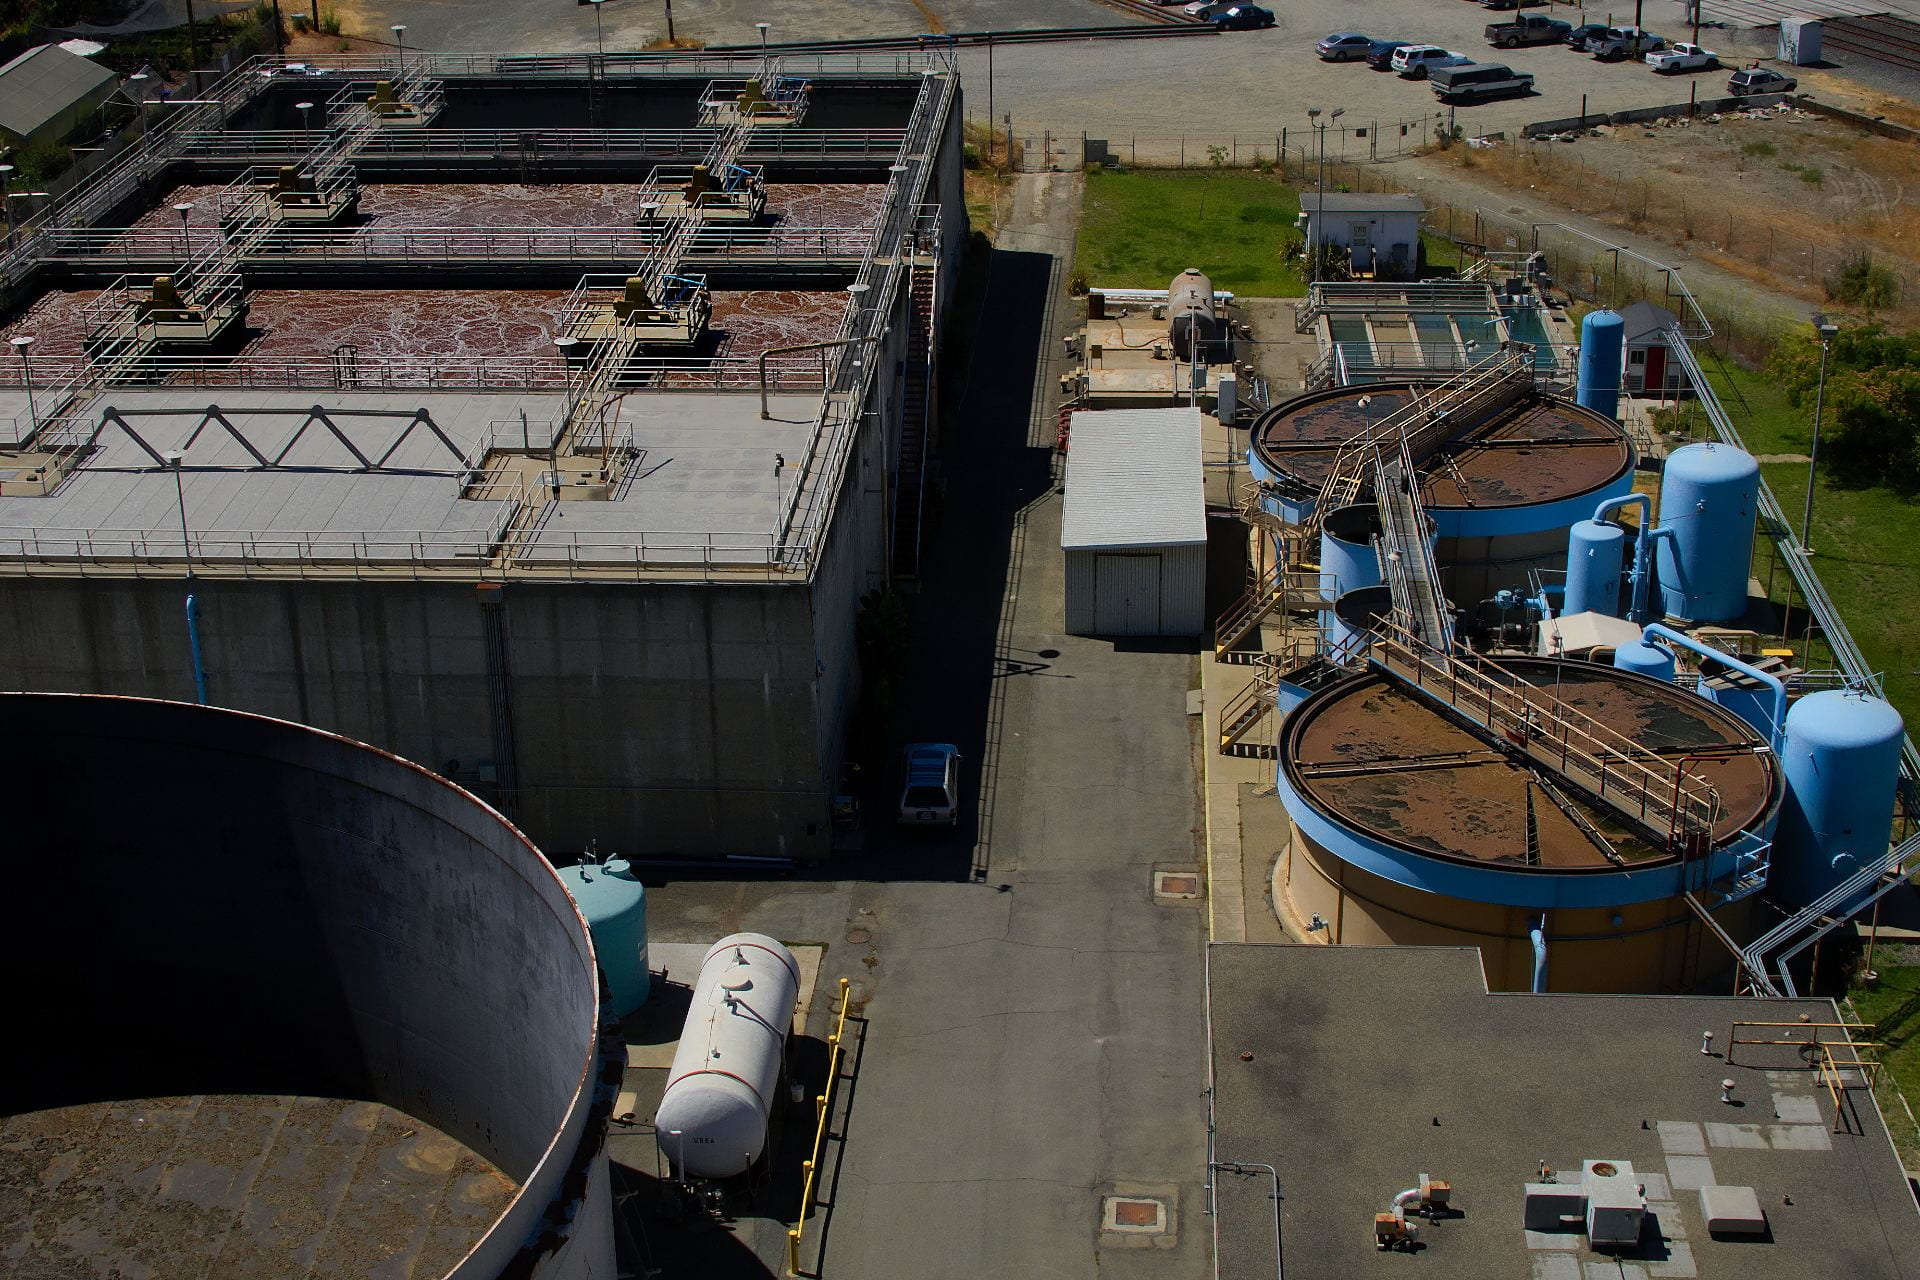 The image shows a wastewater treatment plant.